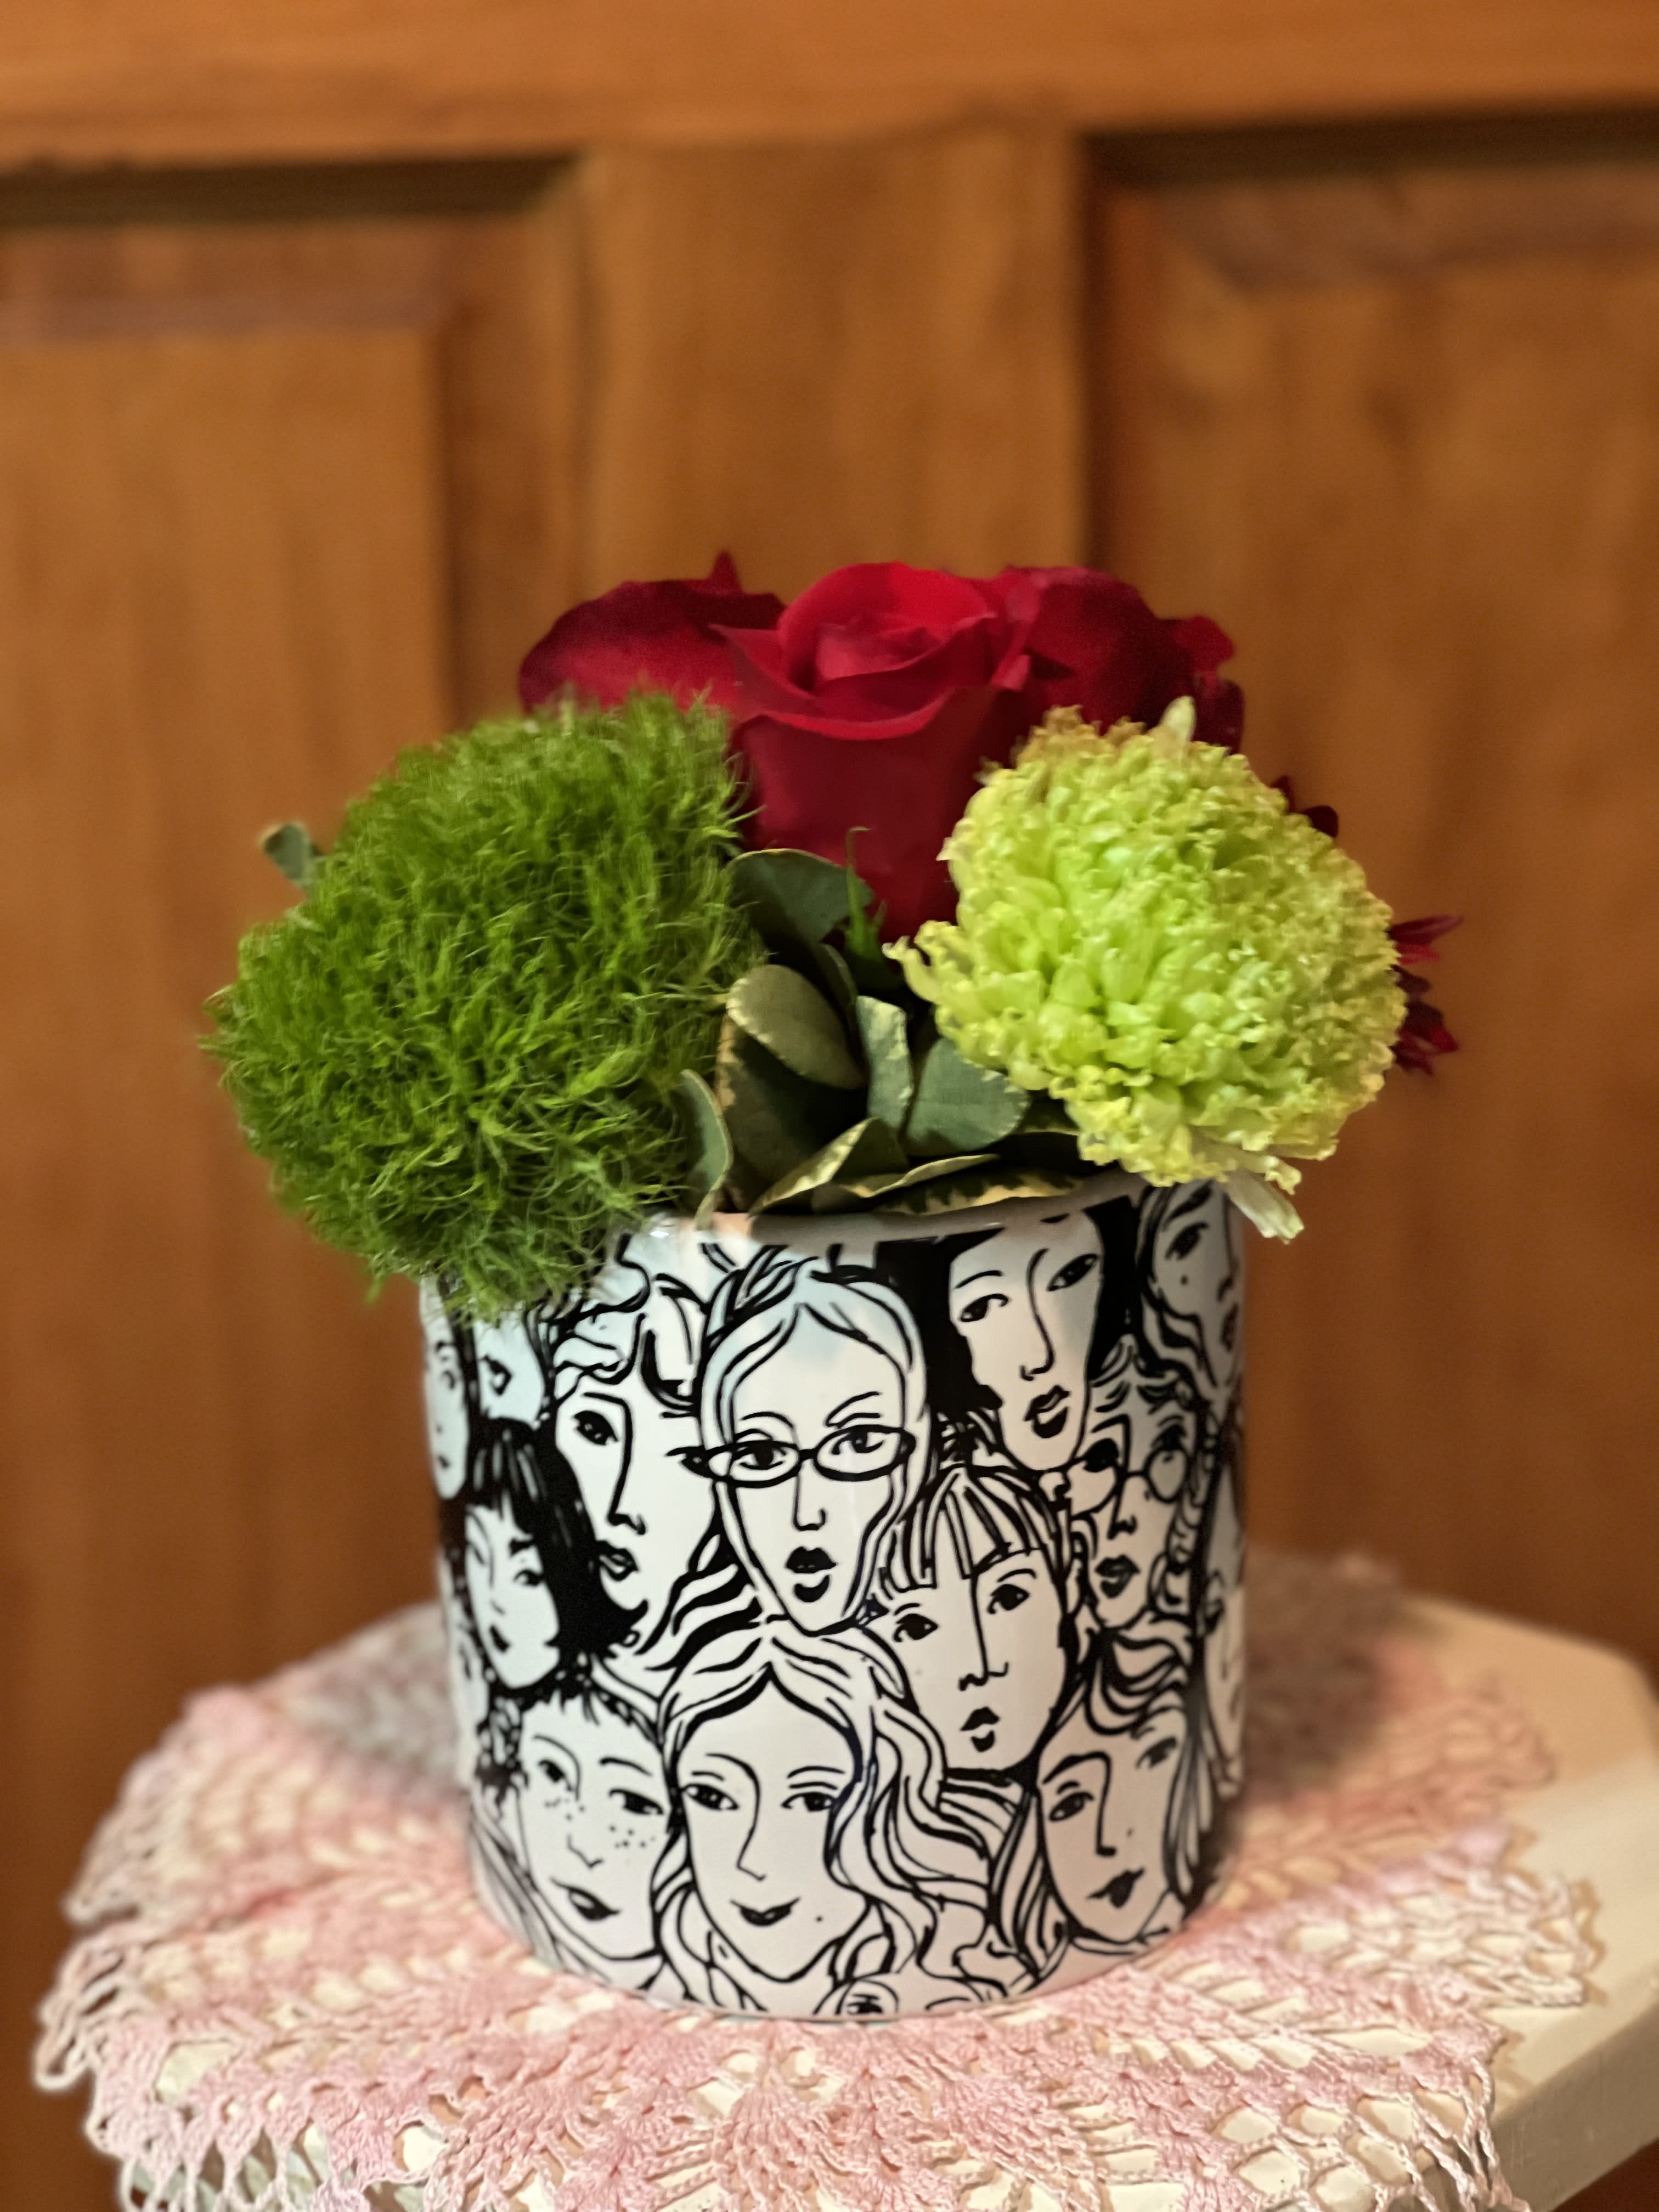 My MOM - My MOM is a wonderful statement to the many faces of MOM. The faces of the women could represent the strength, diversity, and beauty of women all over the world. This round ceramic container could be seen as a tribute to the beauty and grace of women. Filled with an assortment of beautiful blooms. 